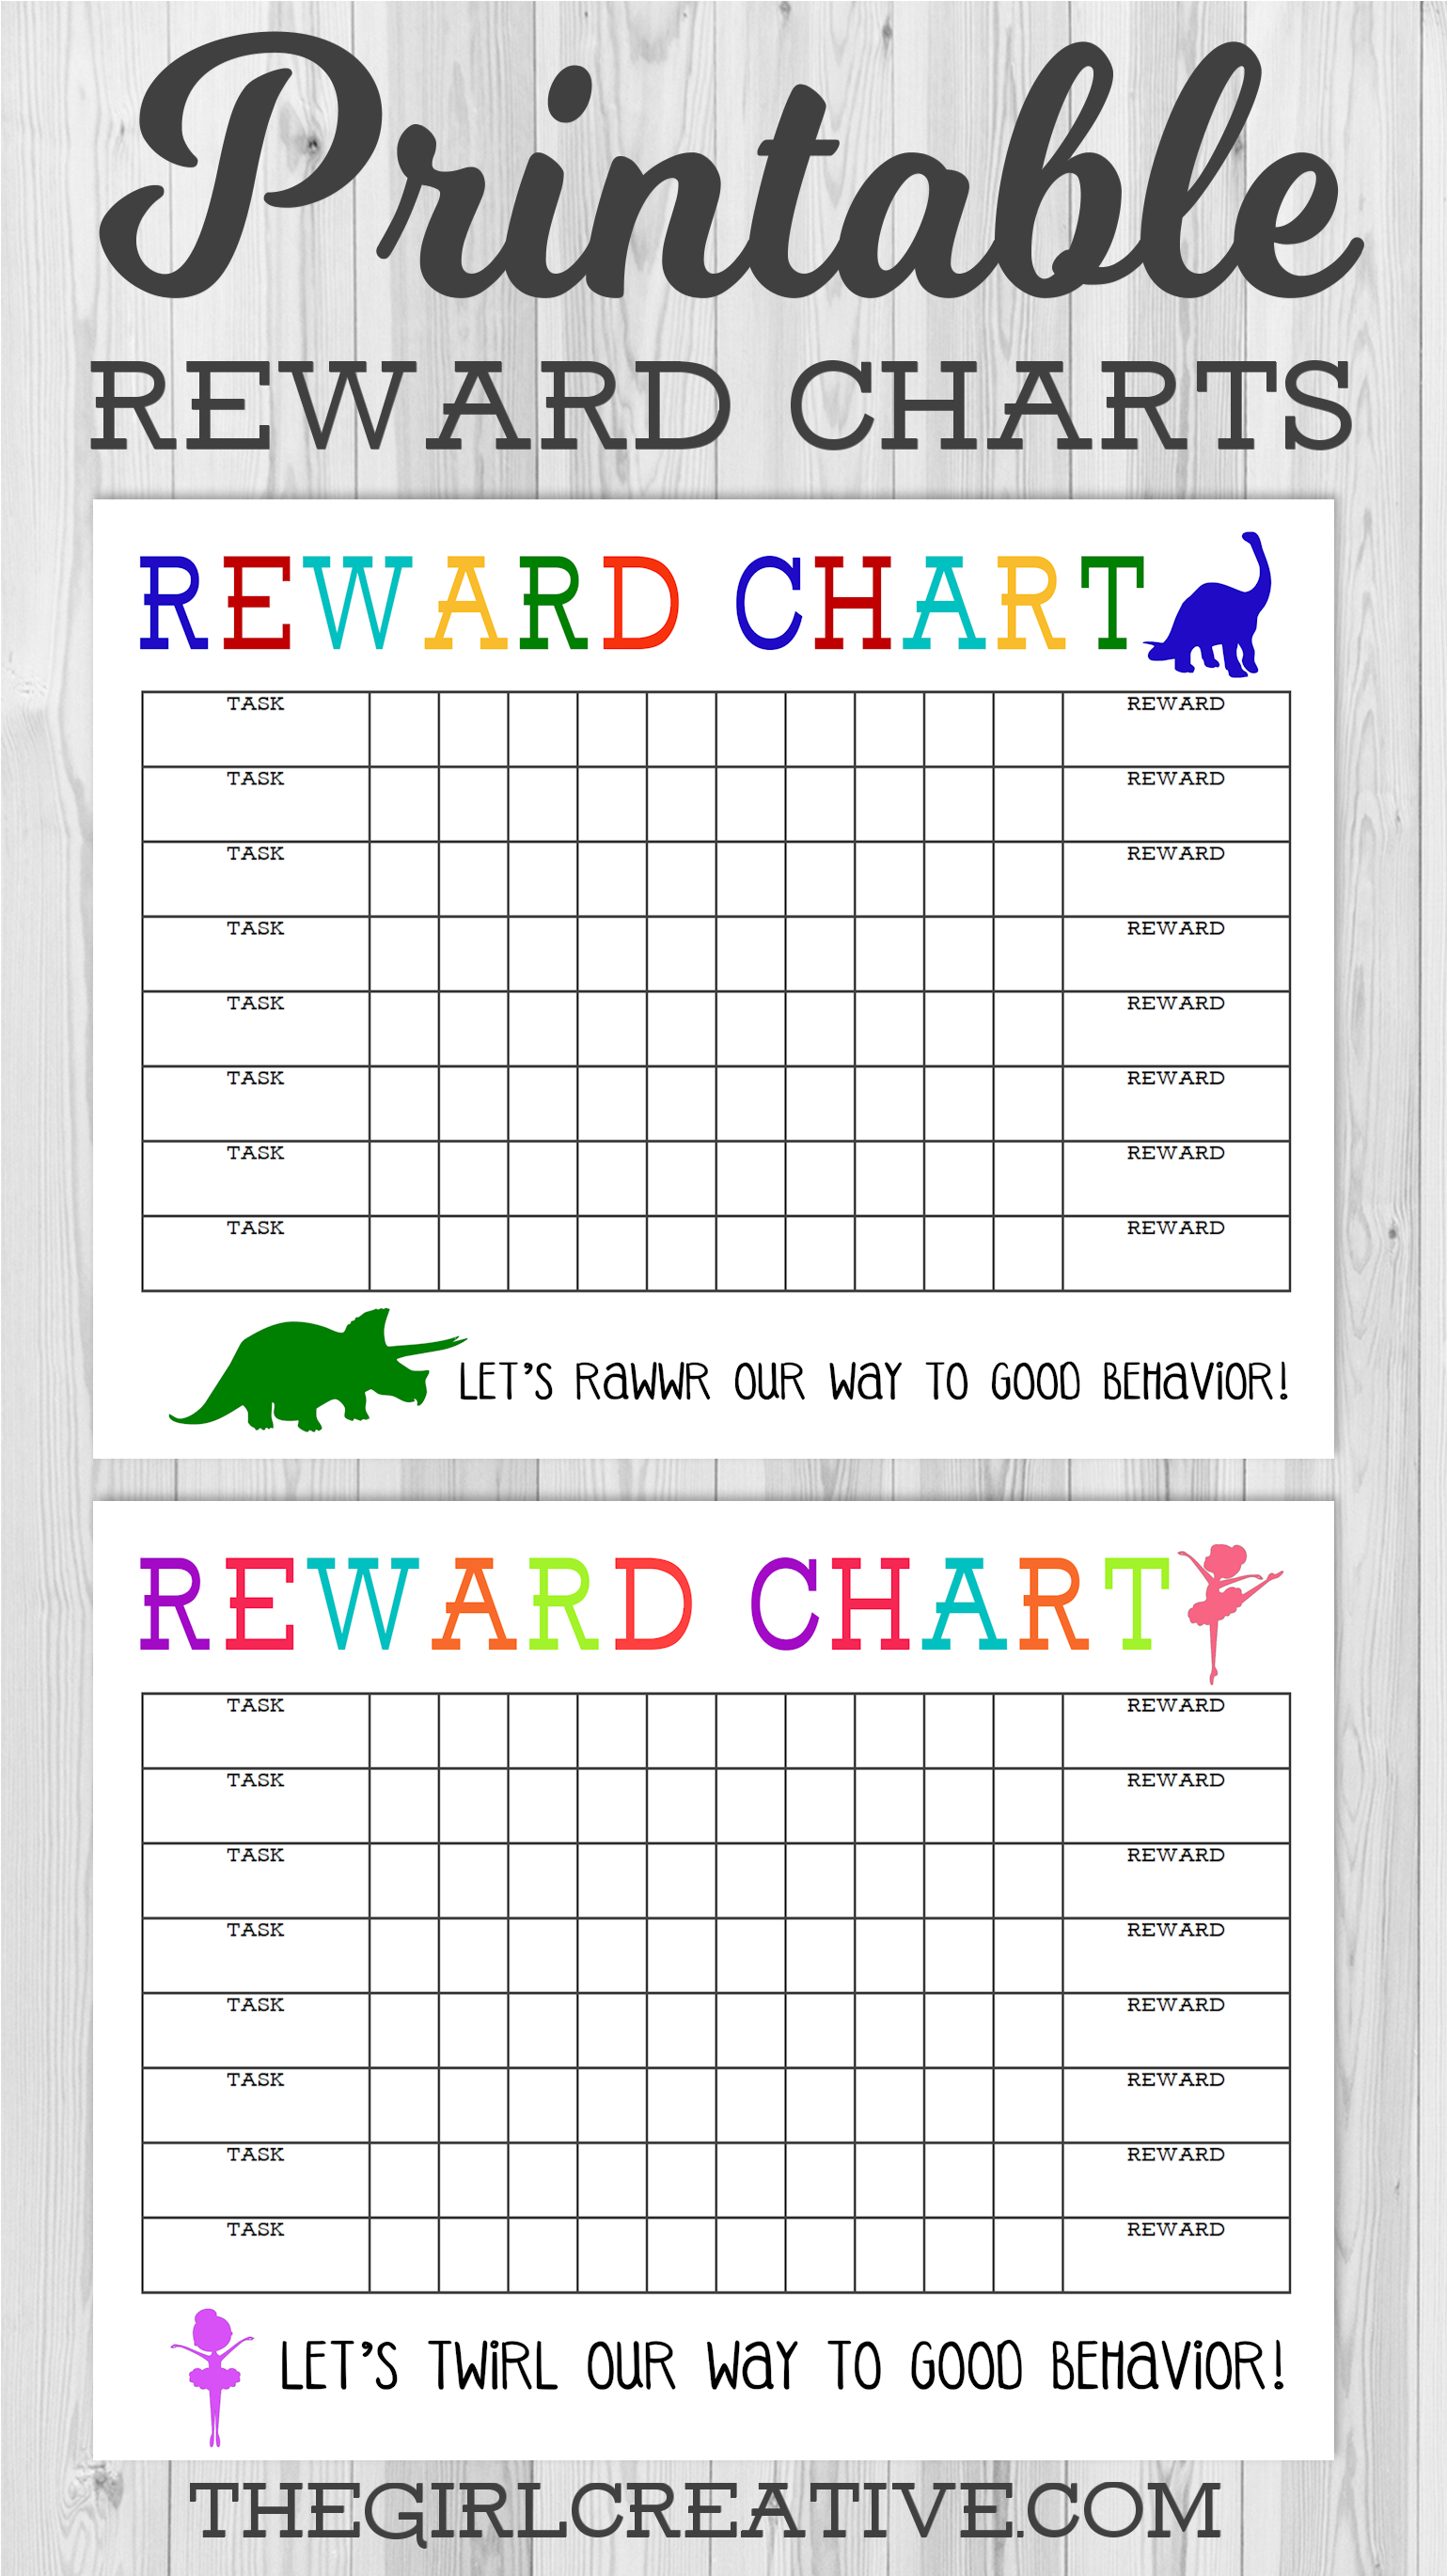 Printable Reward Chart | Share Today&amp;#039;s Craft And Diy Ideas - Reward Charts For Toddlers Free Printable